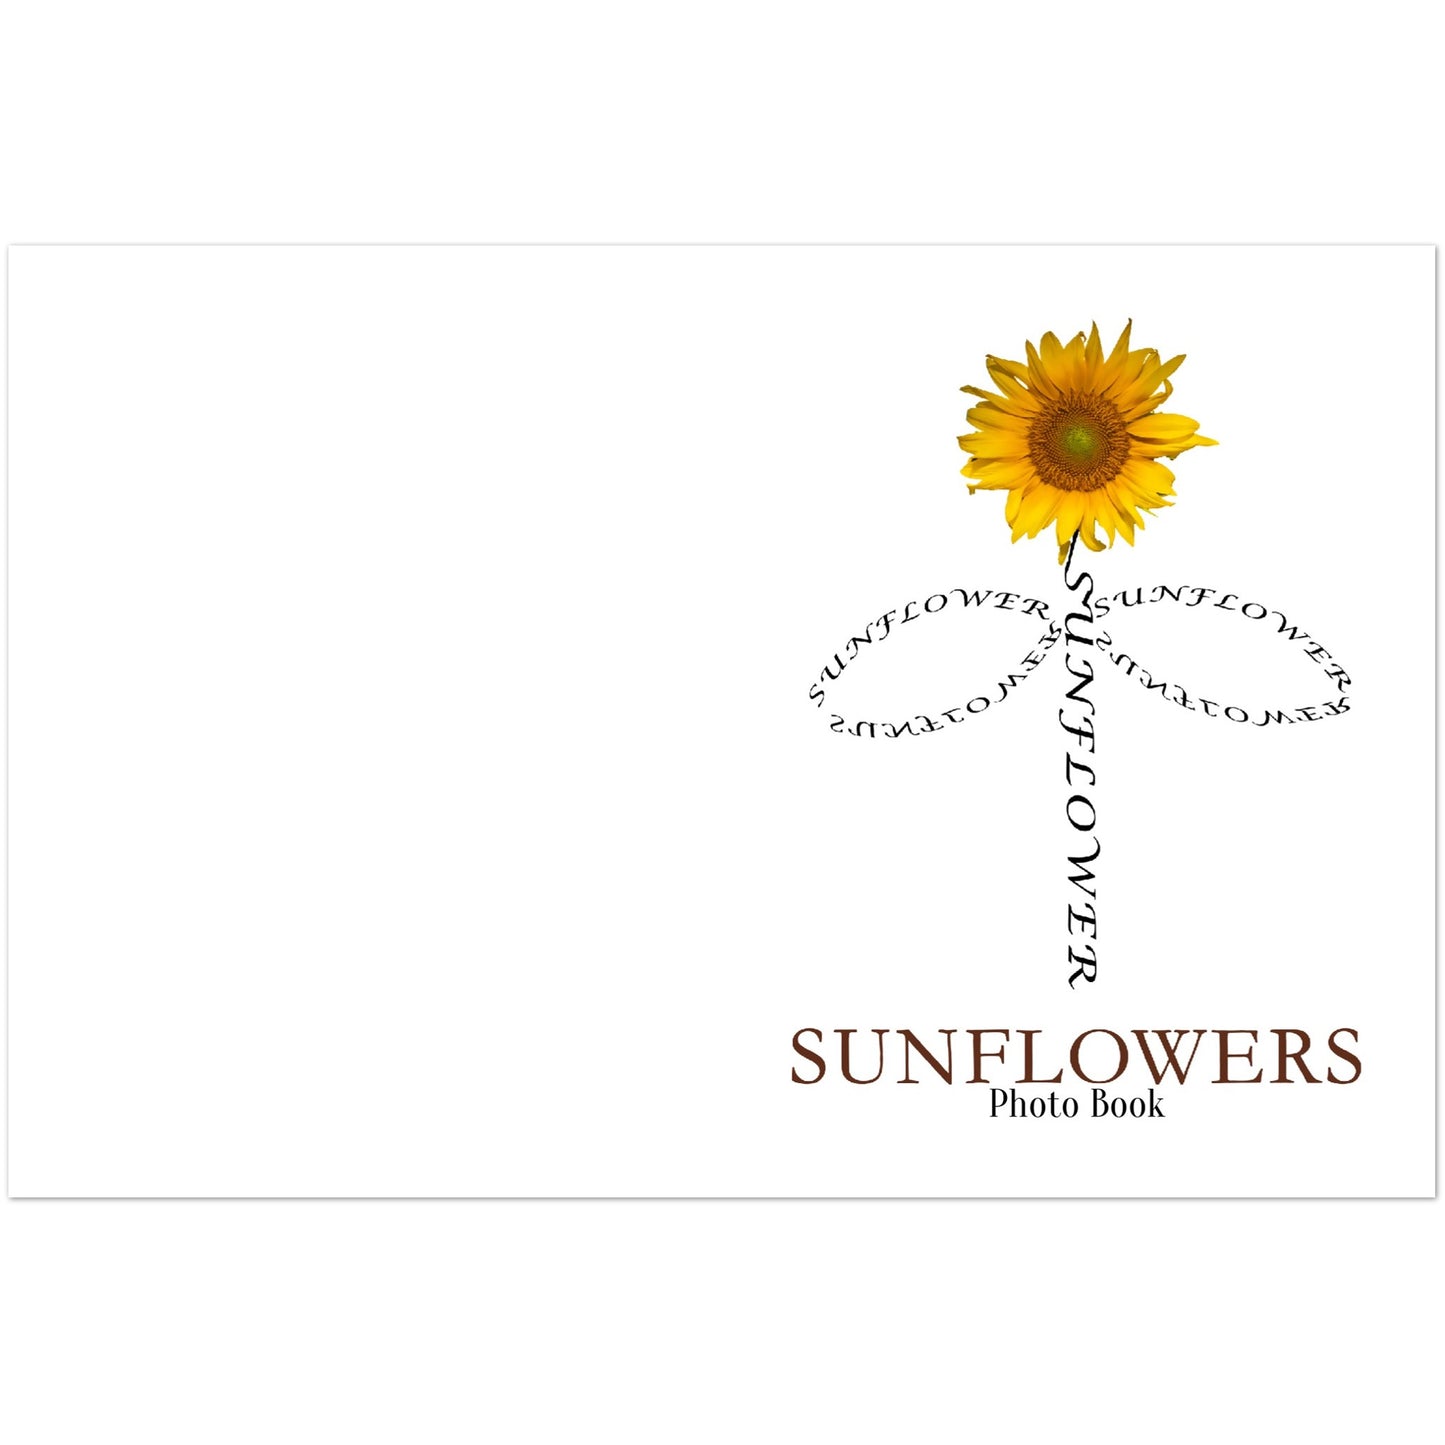 SUNFLOWERS Softcover Photo Book